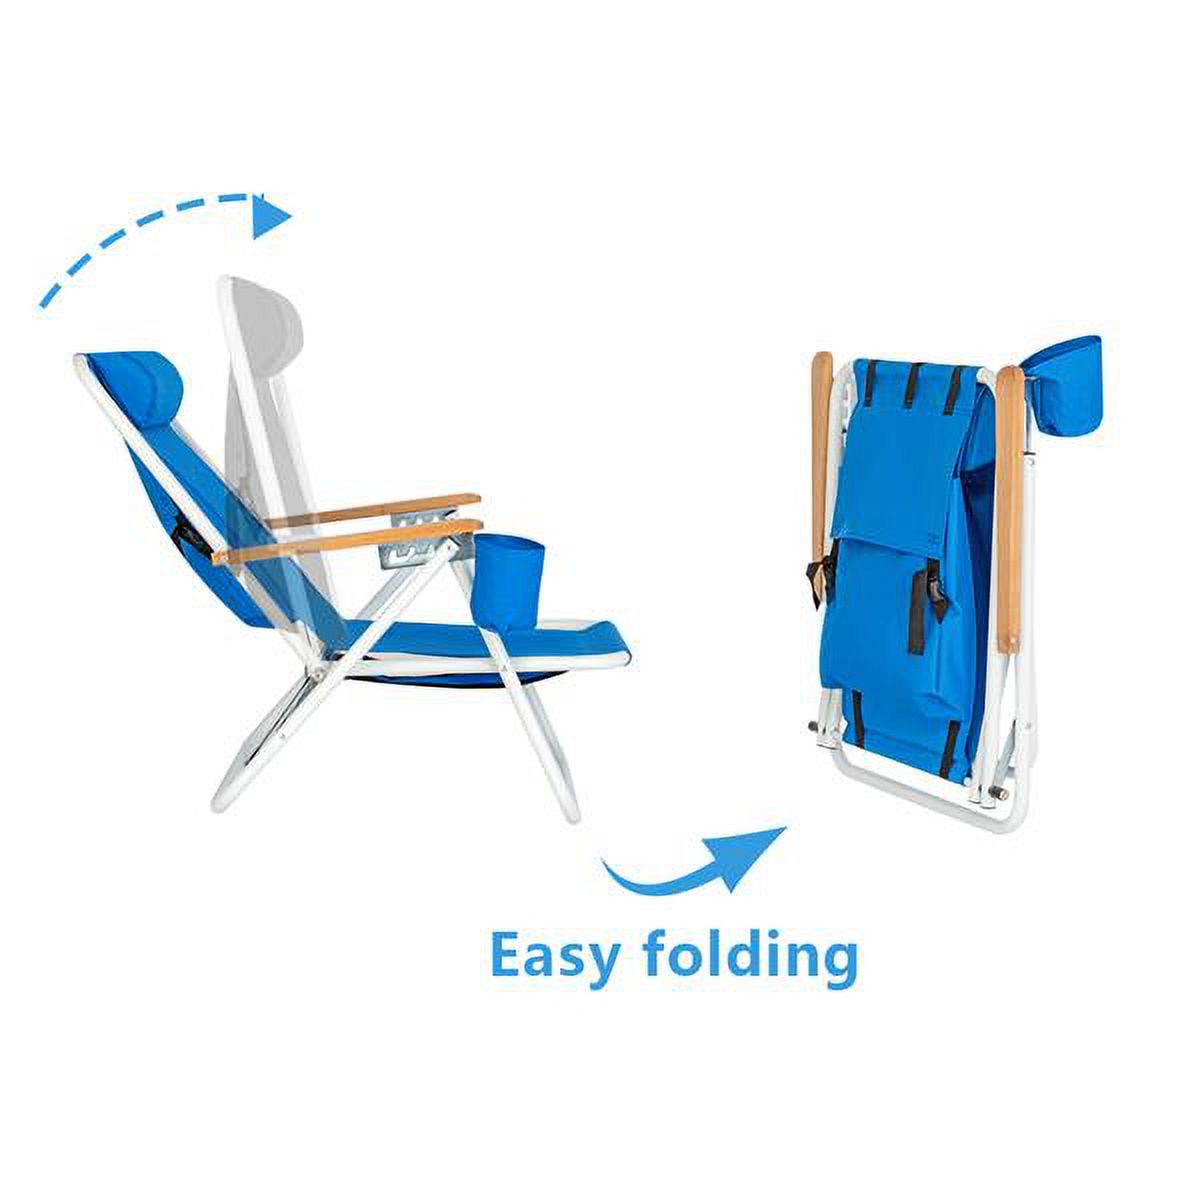 Folding Beach Chair Portable Backpack Beach Chair Patio Folding Lightweight Camping Chairs Outdoor Garden Park Pool Side Lounge Chair with Cup Holder, Blue - image 3 of 10